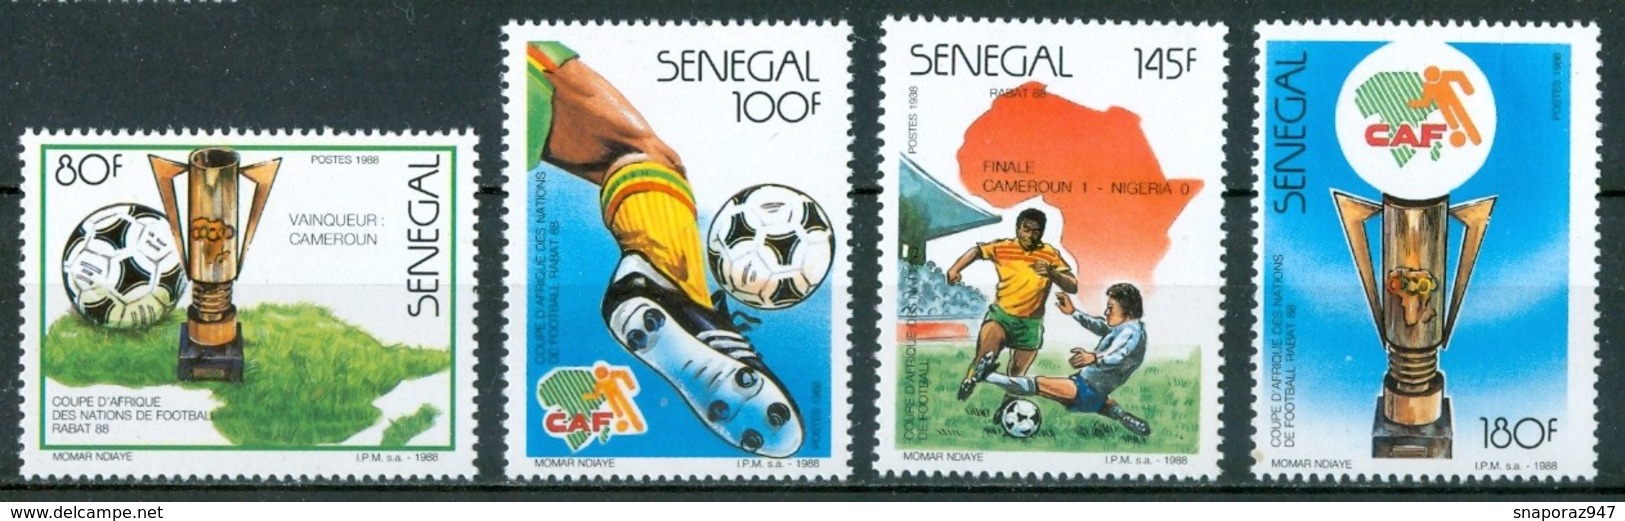 1988 Senegal Coppa D'Africa Cup Coupe D'Dafrique Calcio Football Set MNH** Nu13 - Africa Cup Of Nations